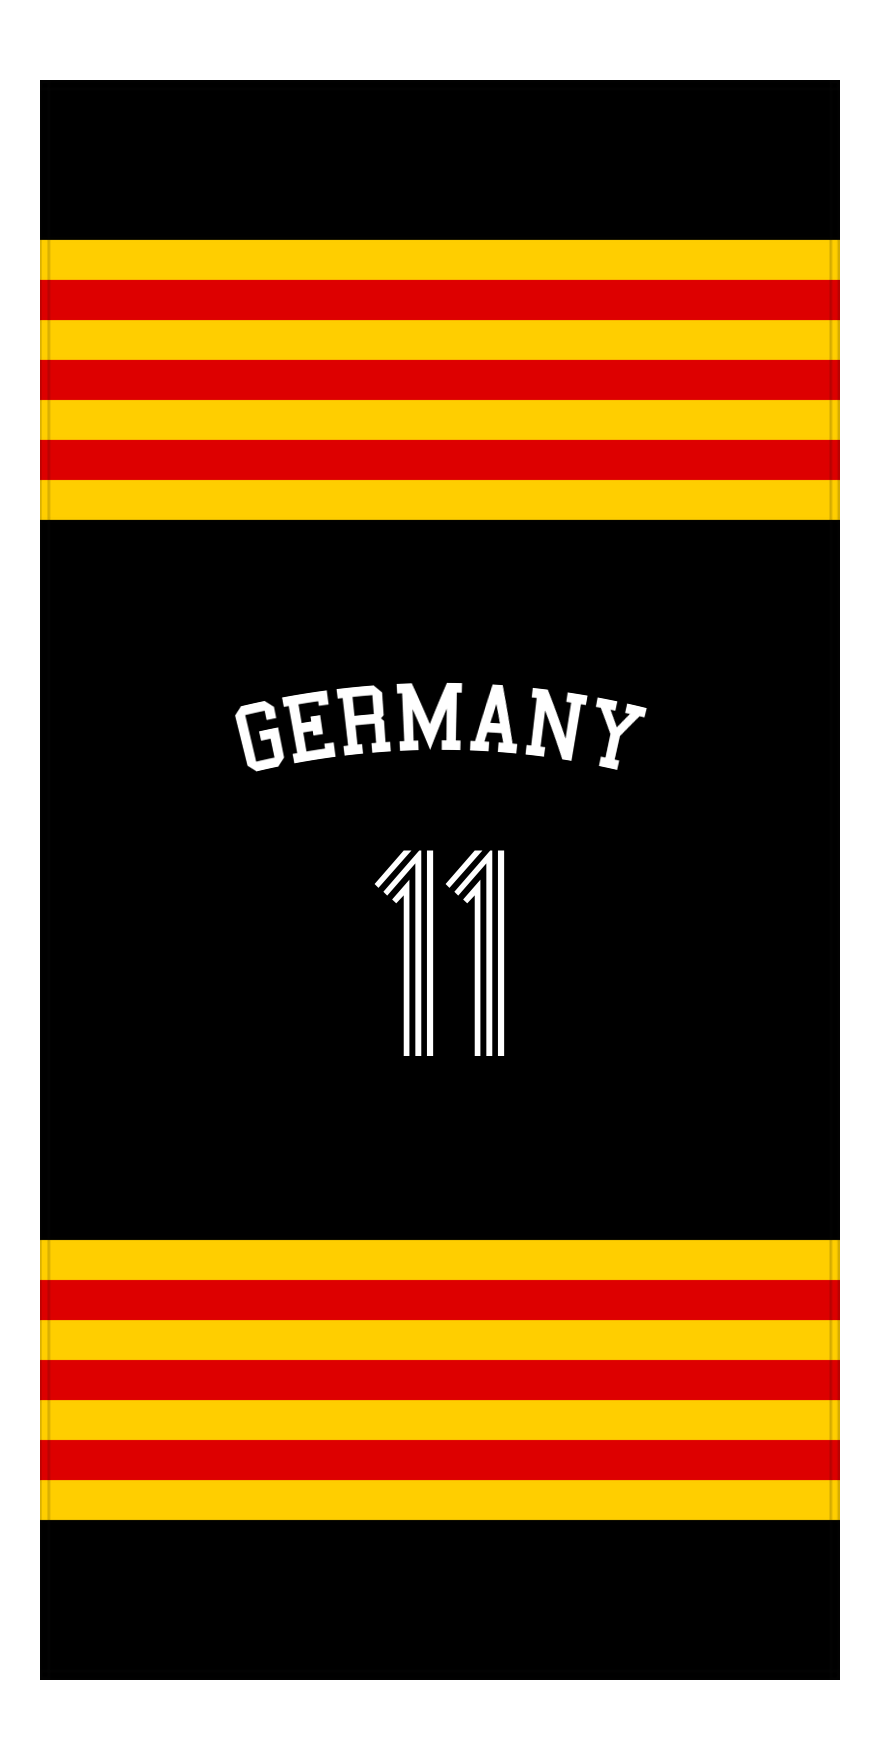 Personalized Jersey Number 3-on-1 Stripes Sports Beach Towel with Arched Name - Germany - Vertical Design - Front View